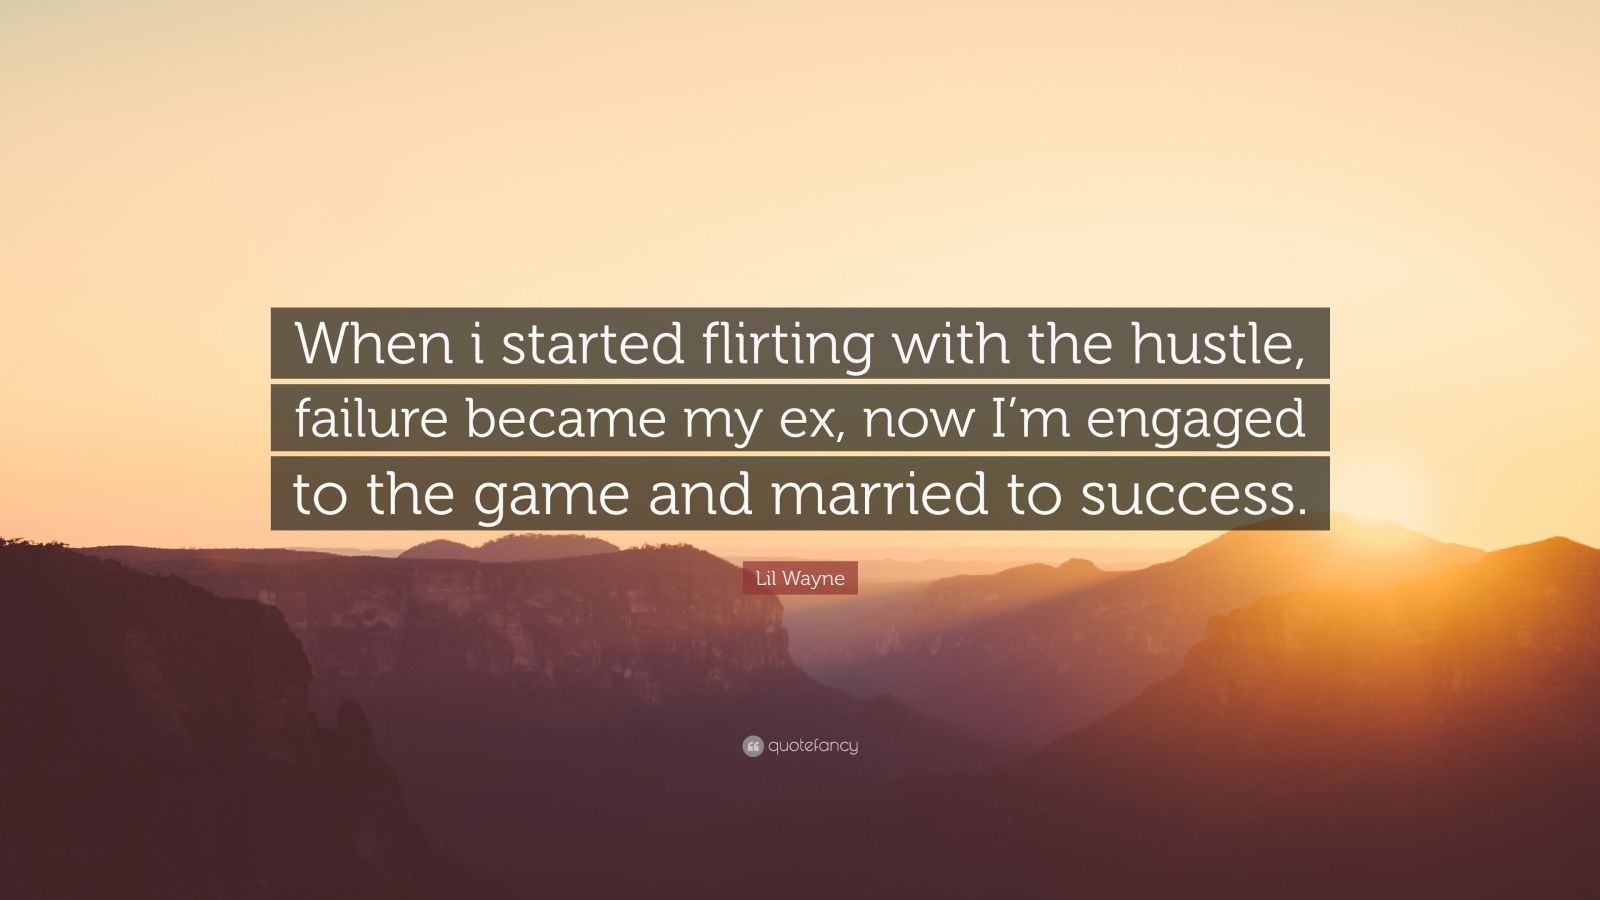 Lil Wayne Quote: “When i started flirting with the hustle, failure became my ex, now ...1600 x 900